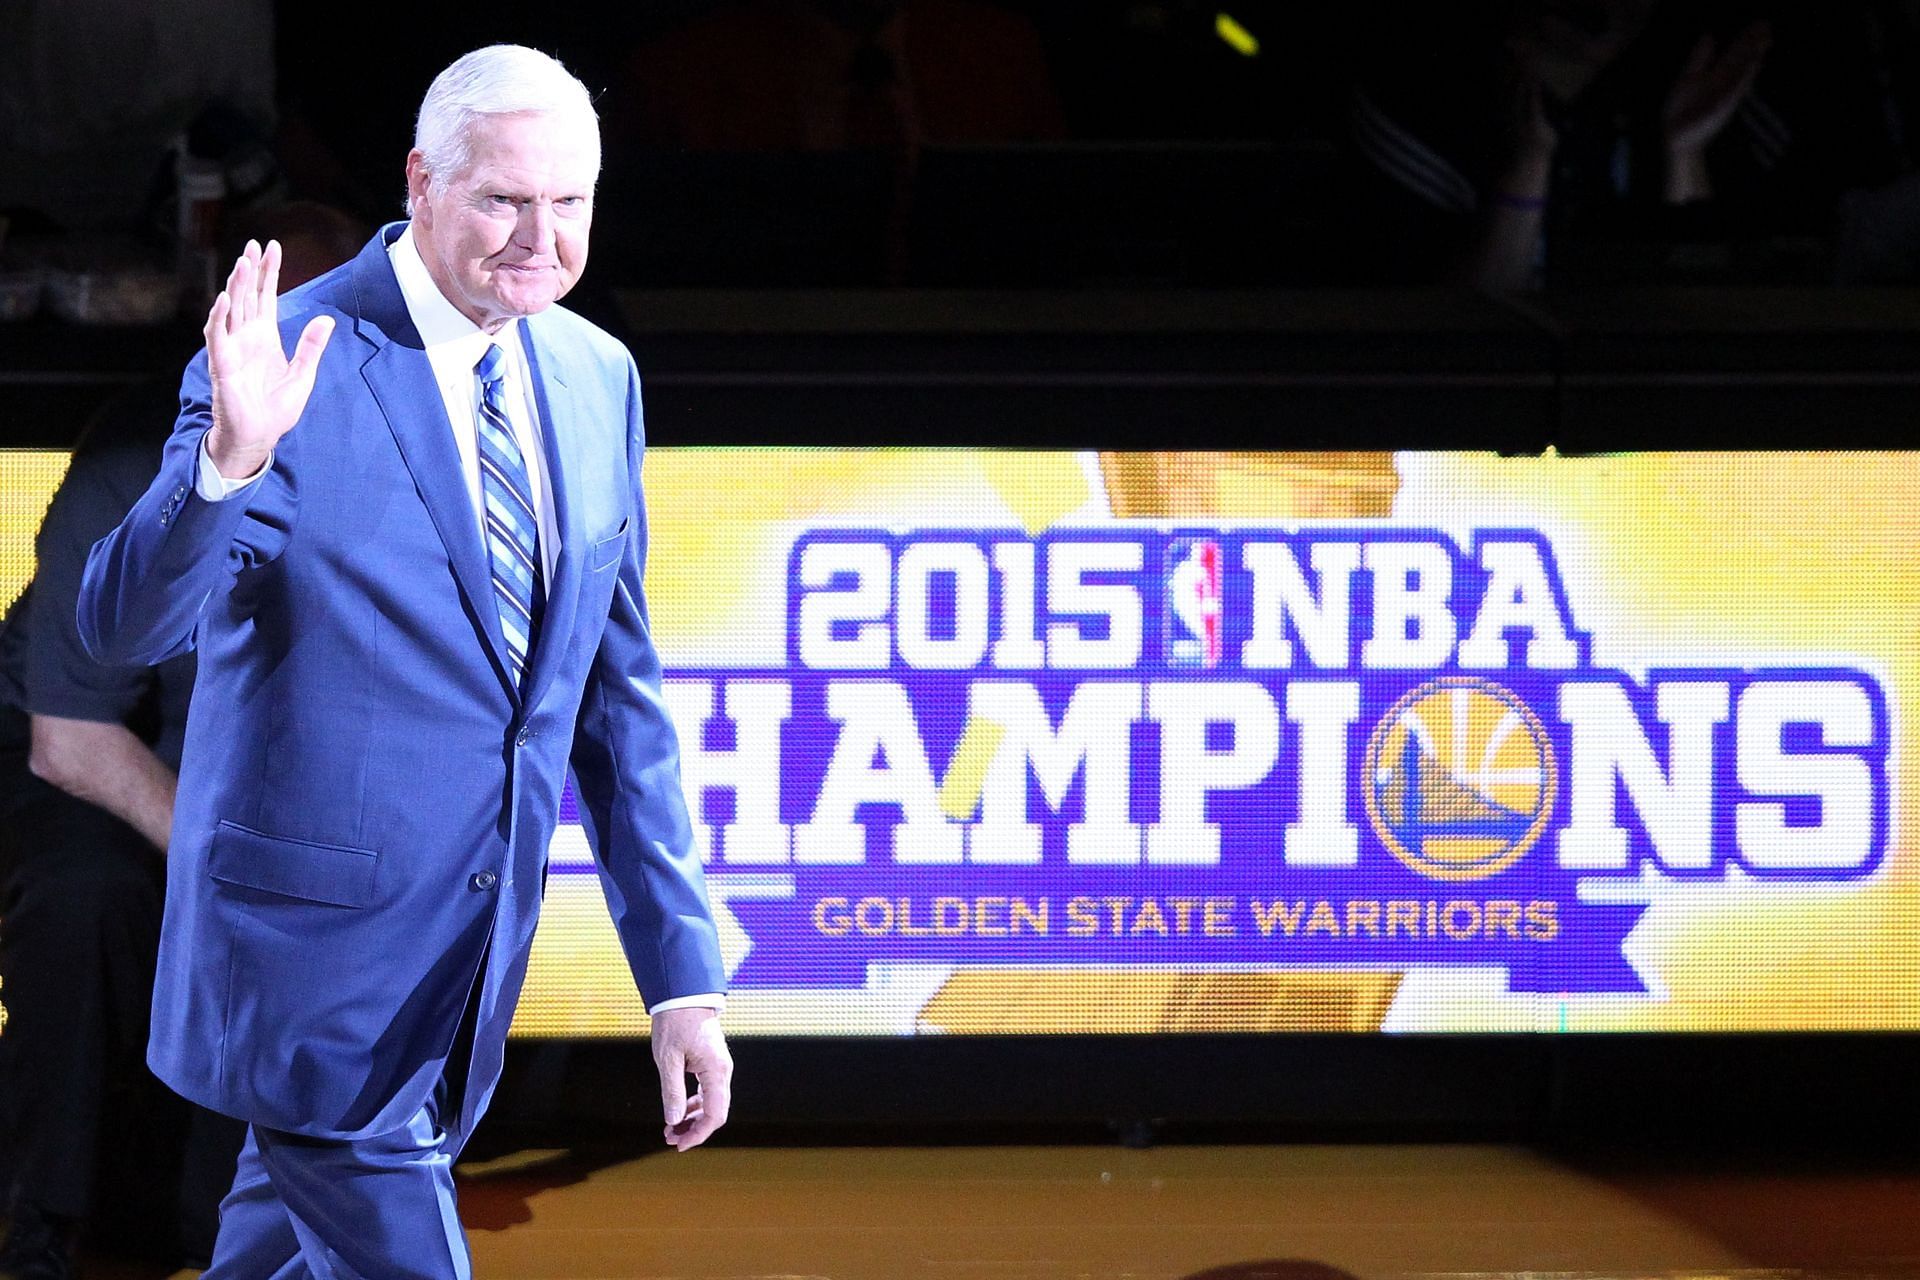 Executive Board Member Jerry West waves to the crowd during the ring ceremony for the 2015 Golden State Warriors championship season prior to the NBA season opener against the New Orleans Pelicans at ORACLE Arena on October 27, 2015 in Oakland, California.